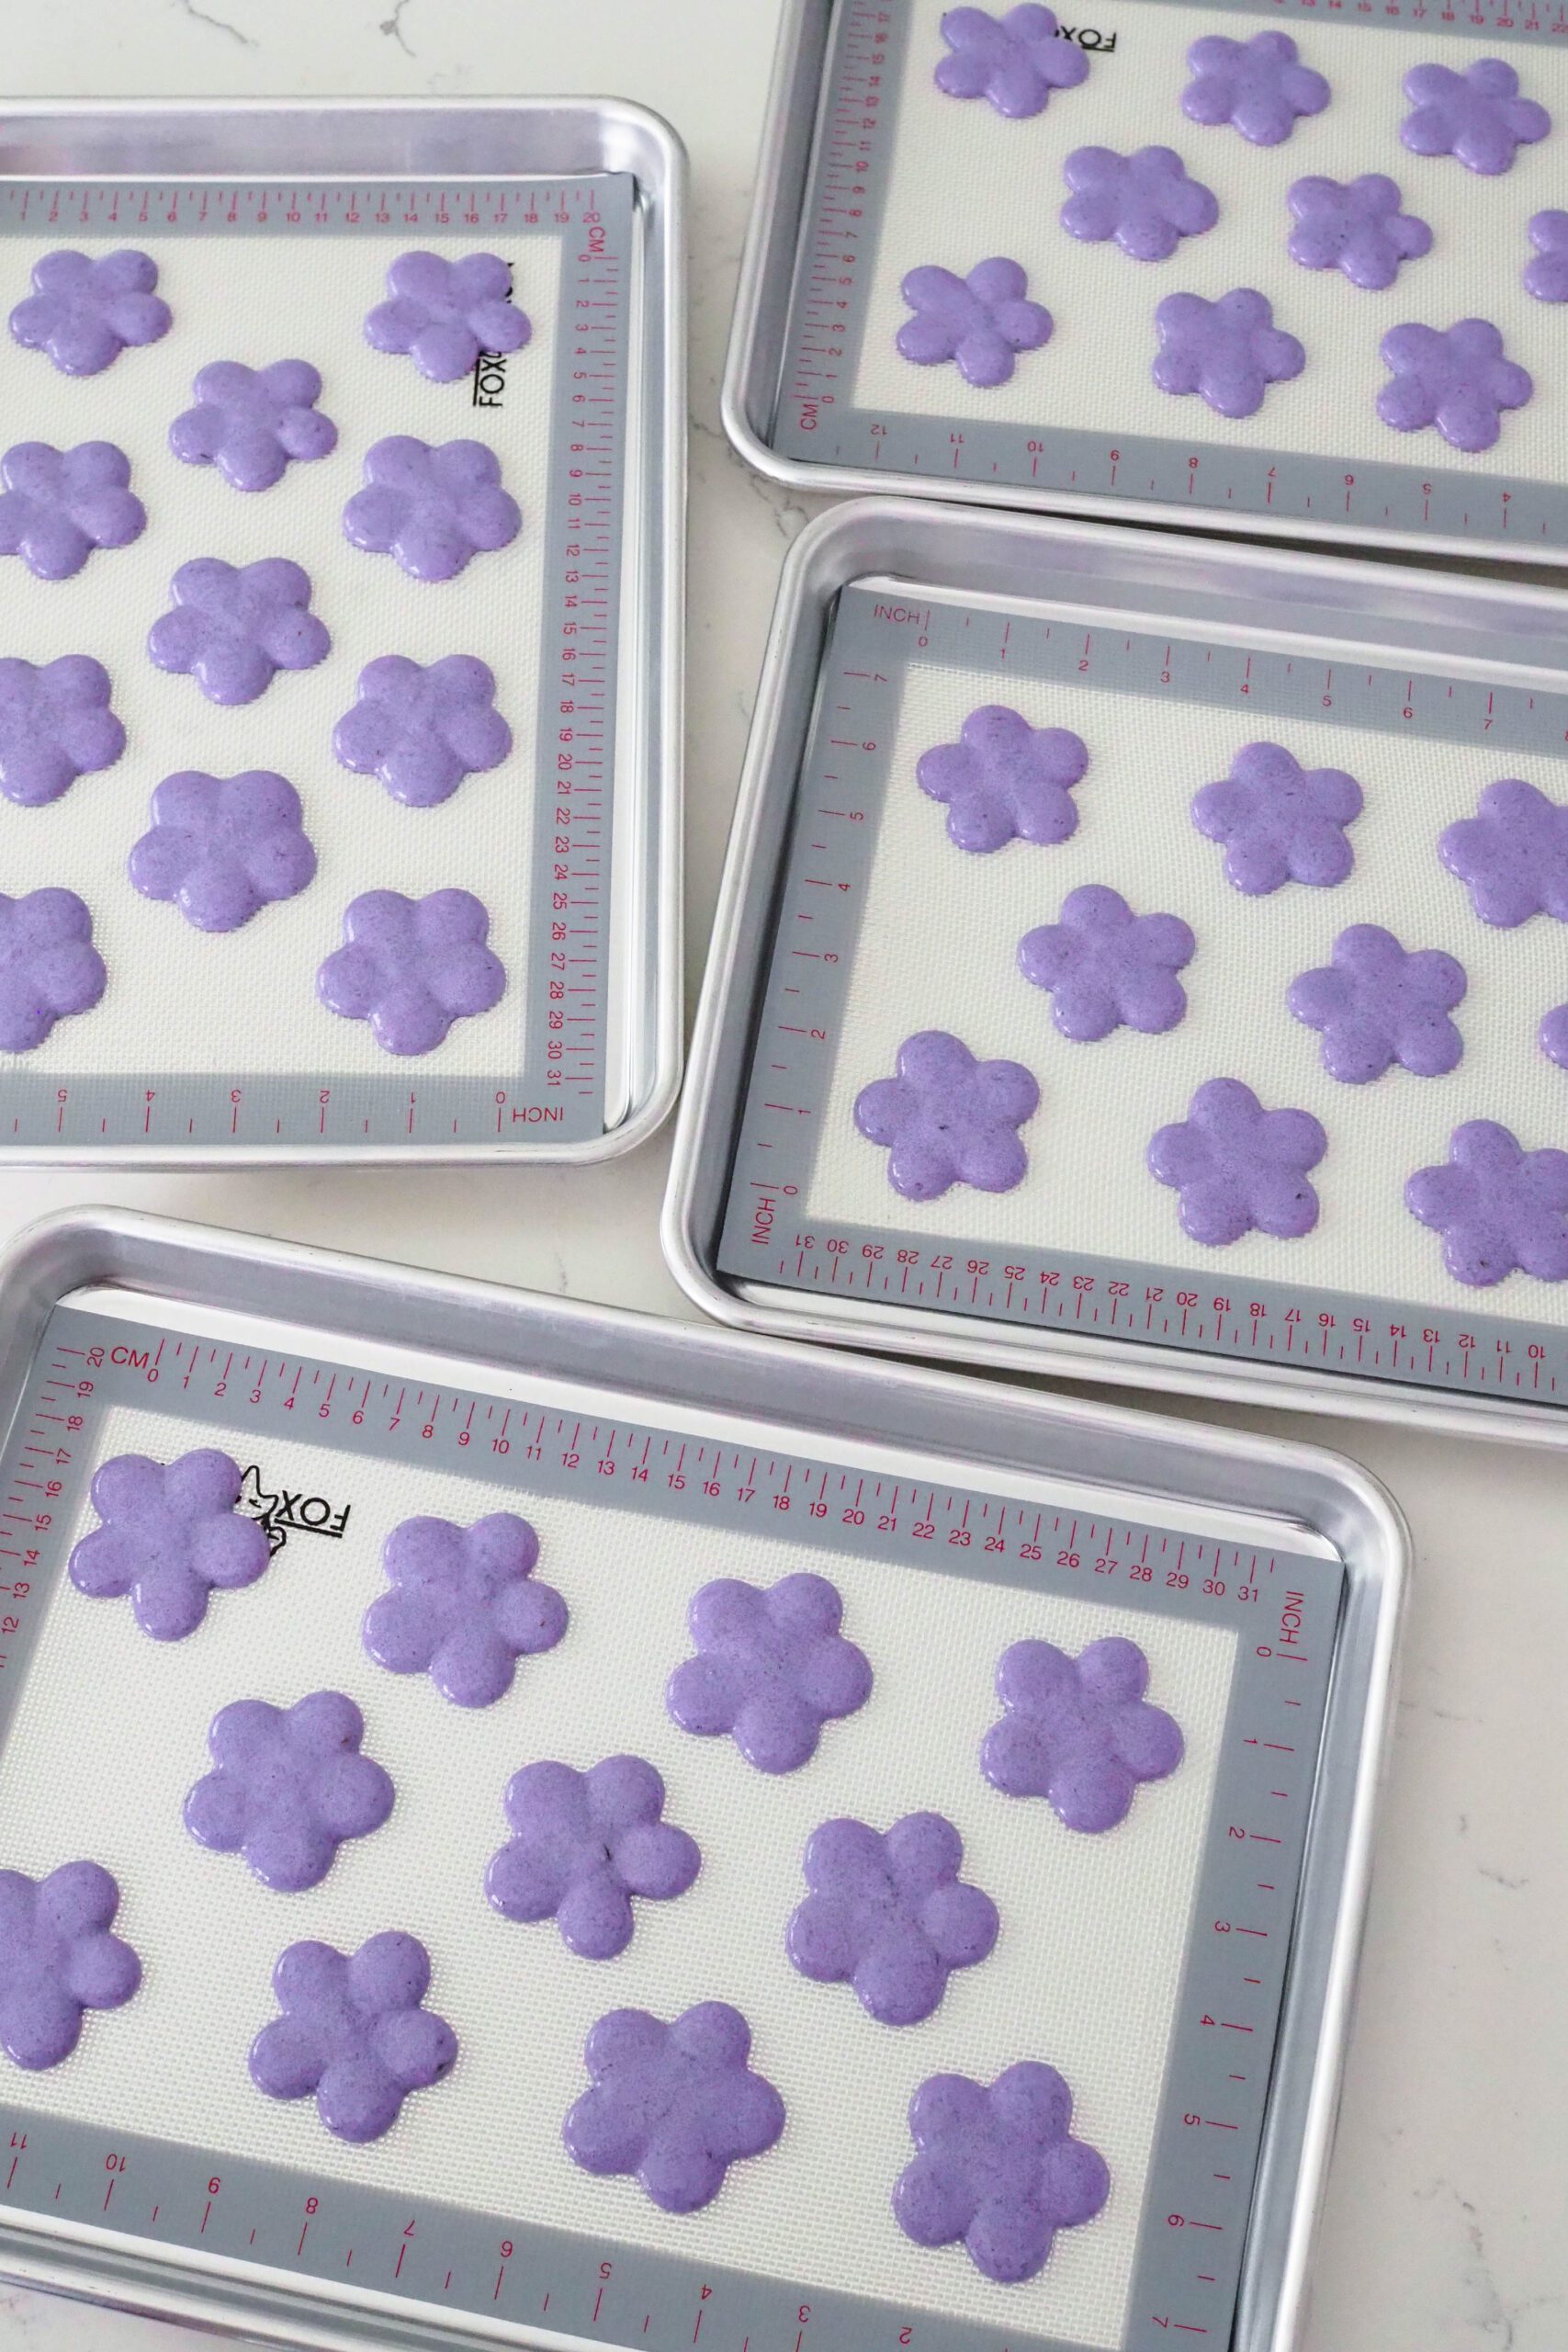 Piped flower macaron shells rest before baking.